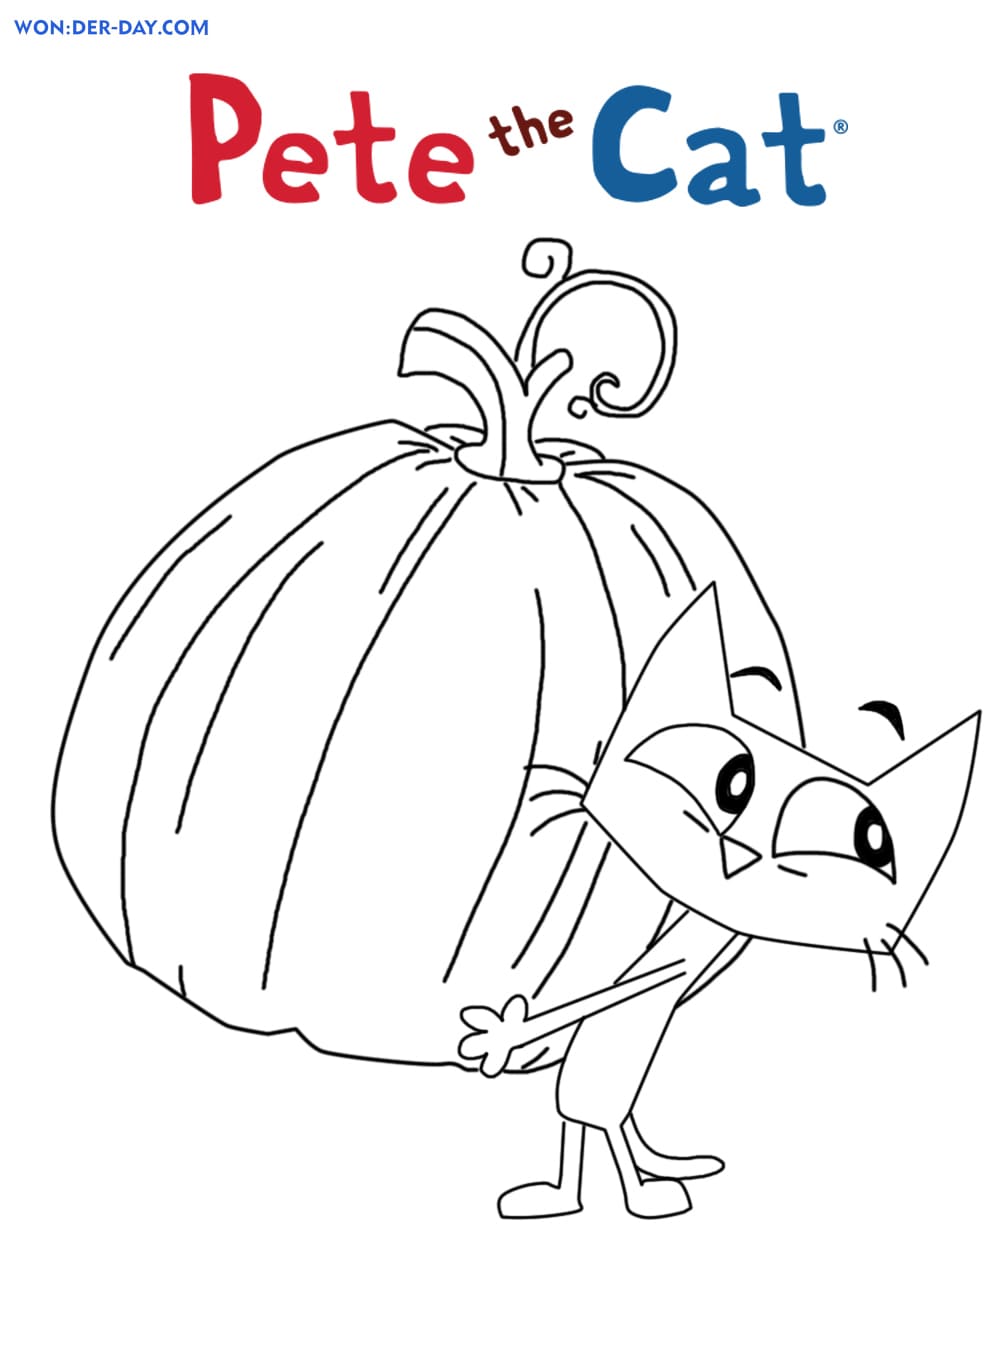 Pete the Cat coloring pages. Free coloring pages WONDER DAY